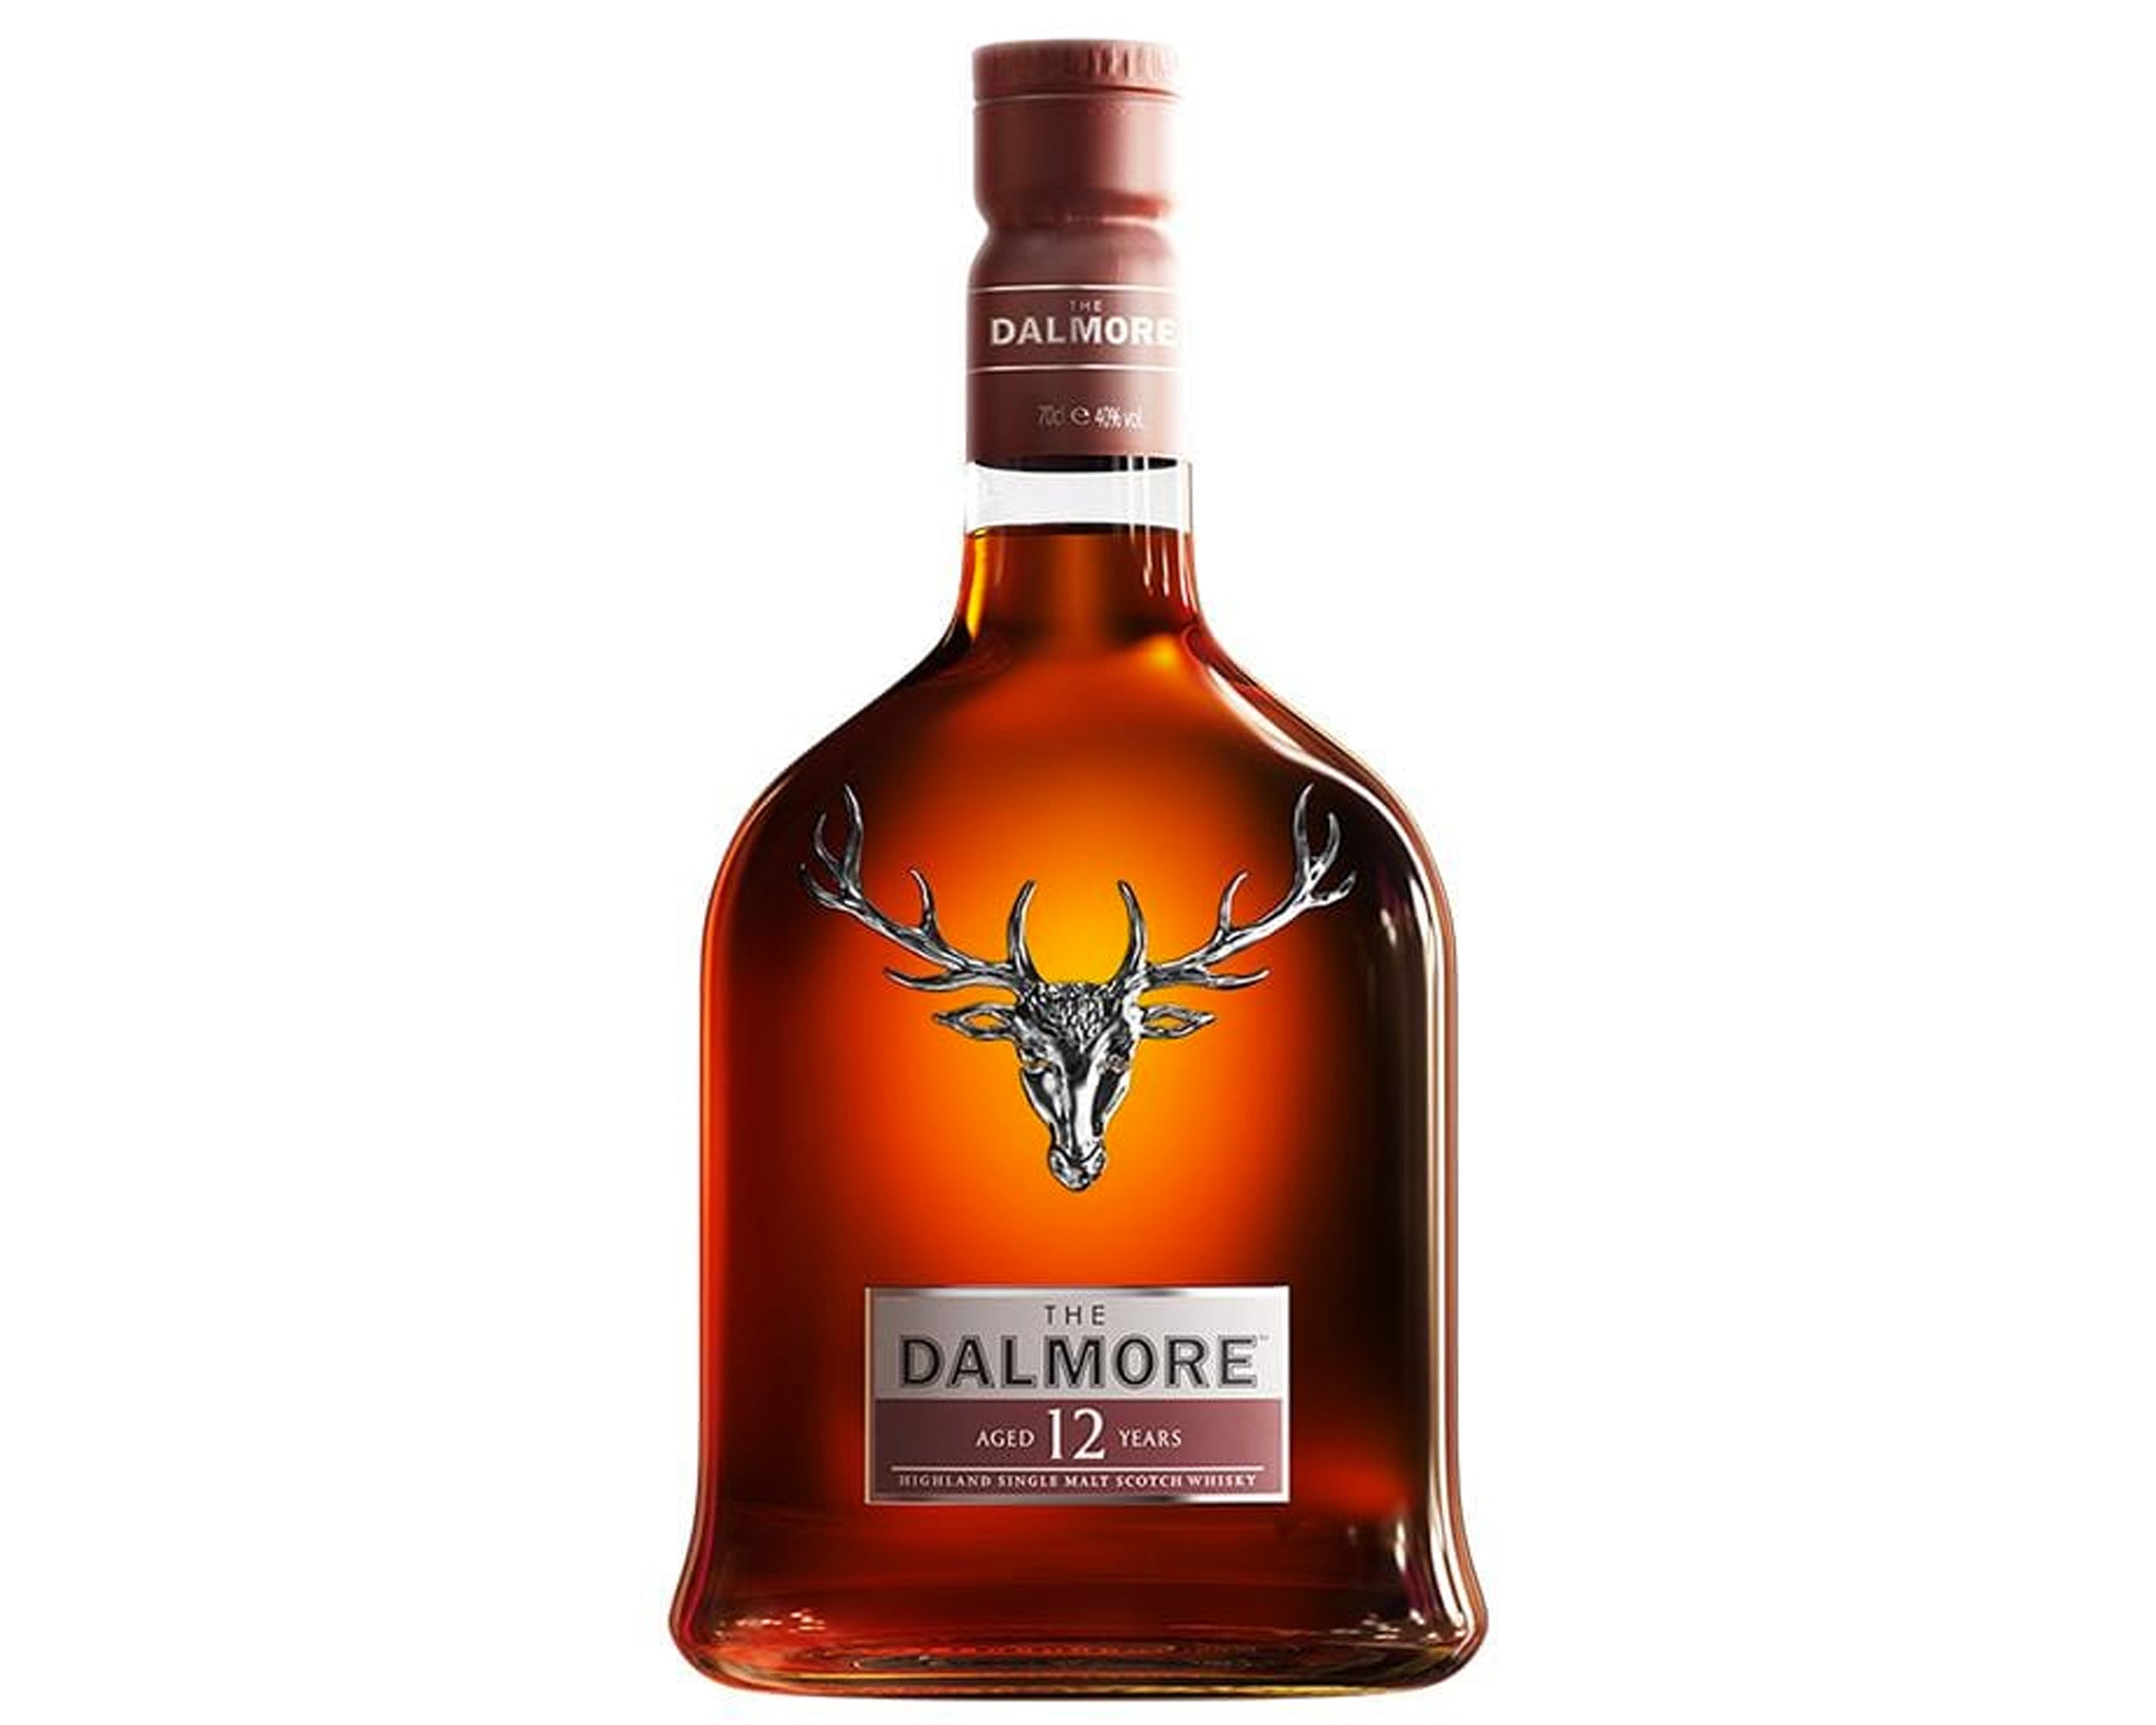 The Dalmore 12 Year Old Scotch Whisky